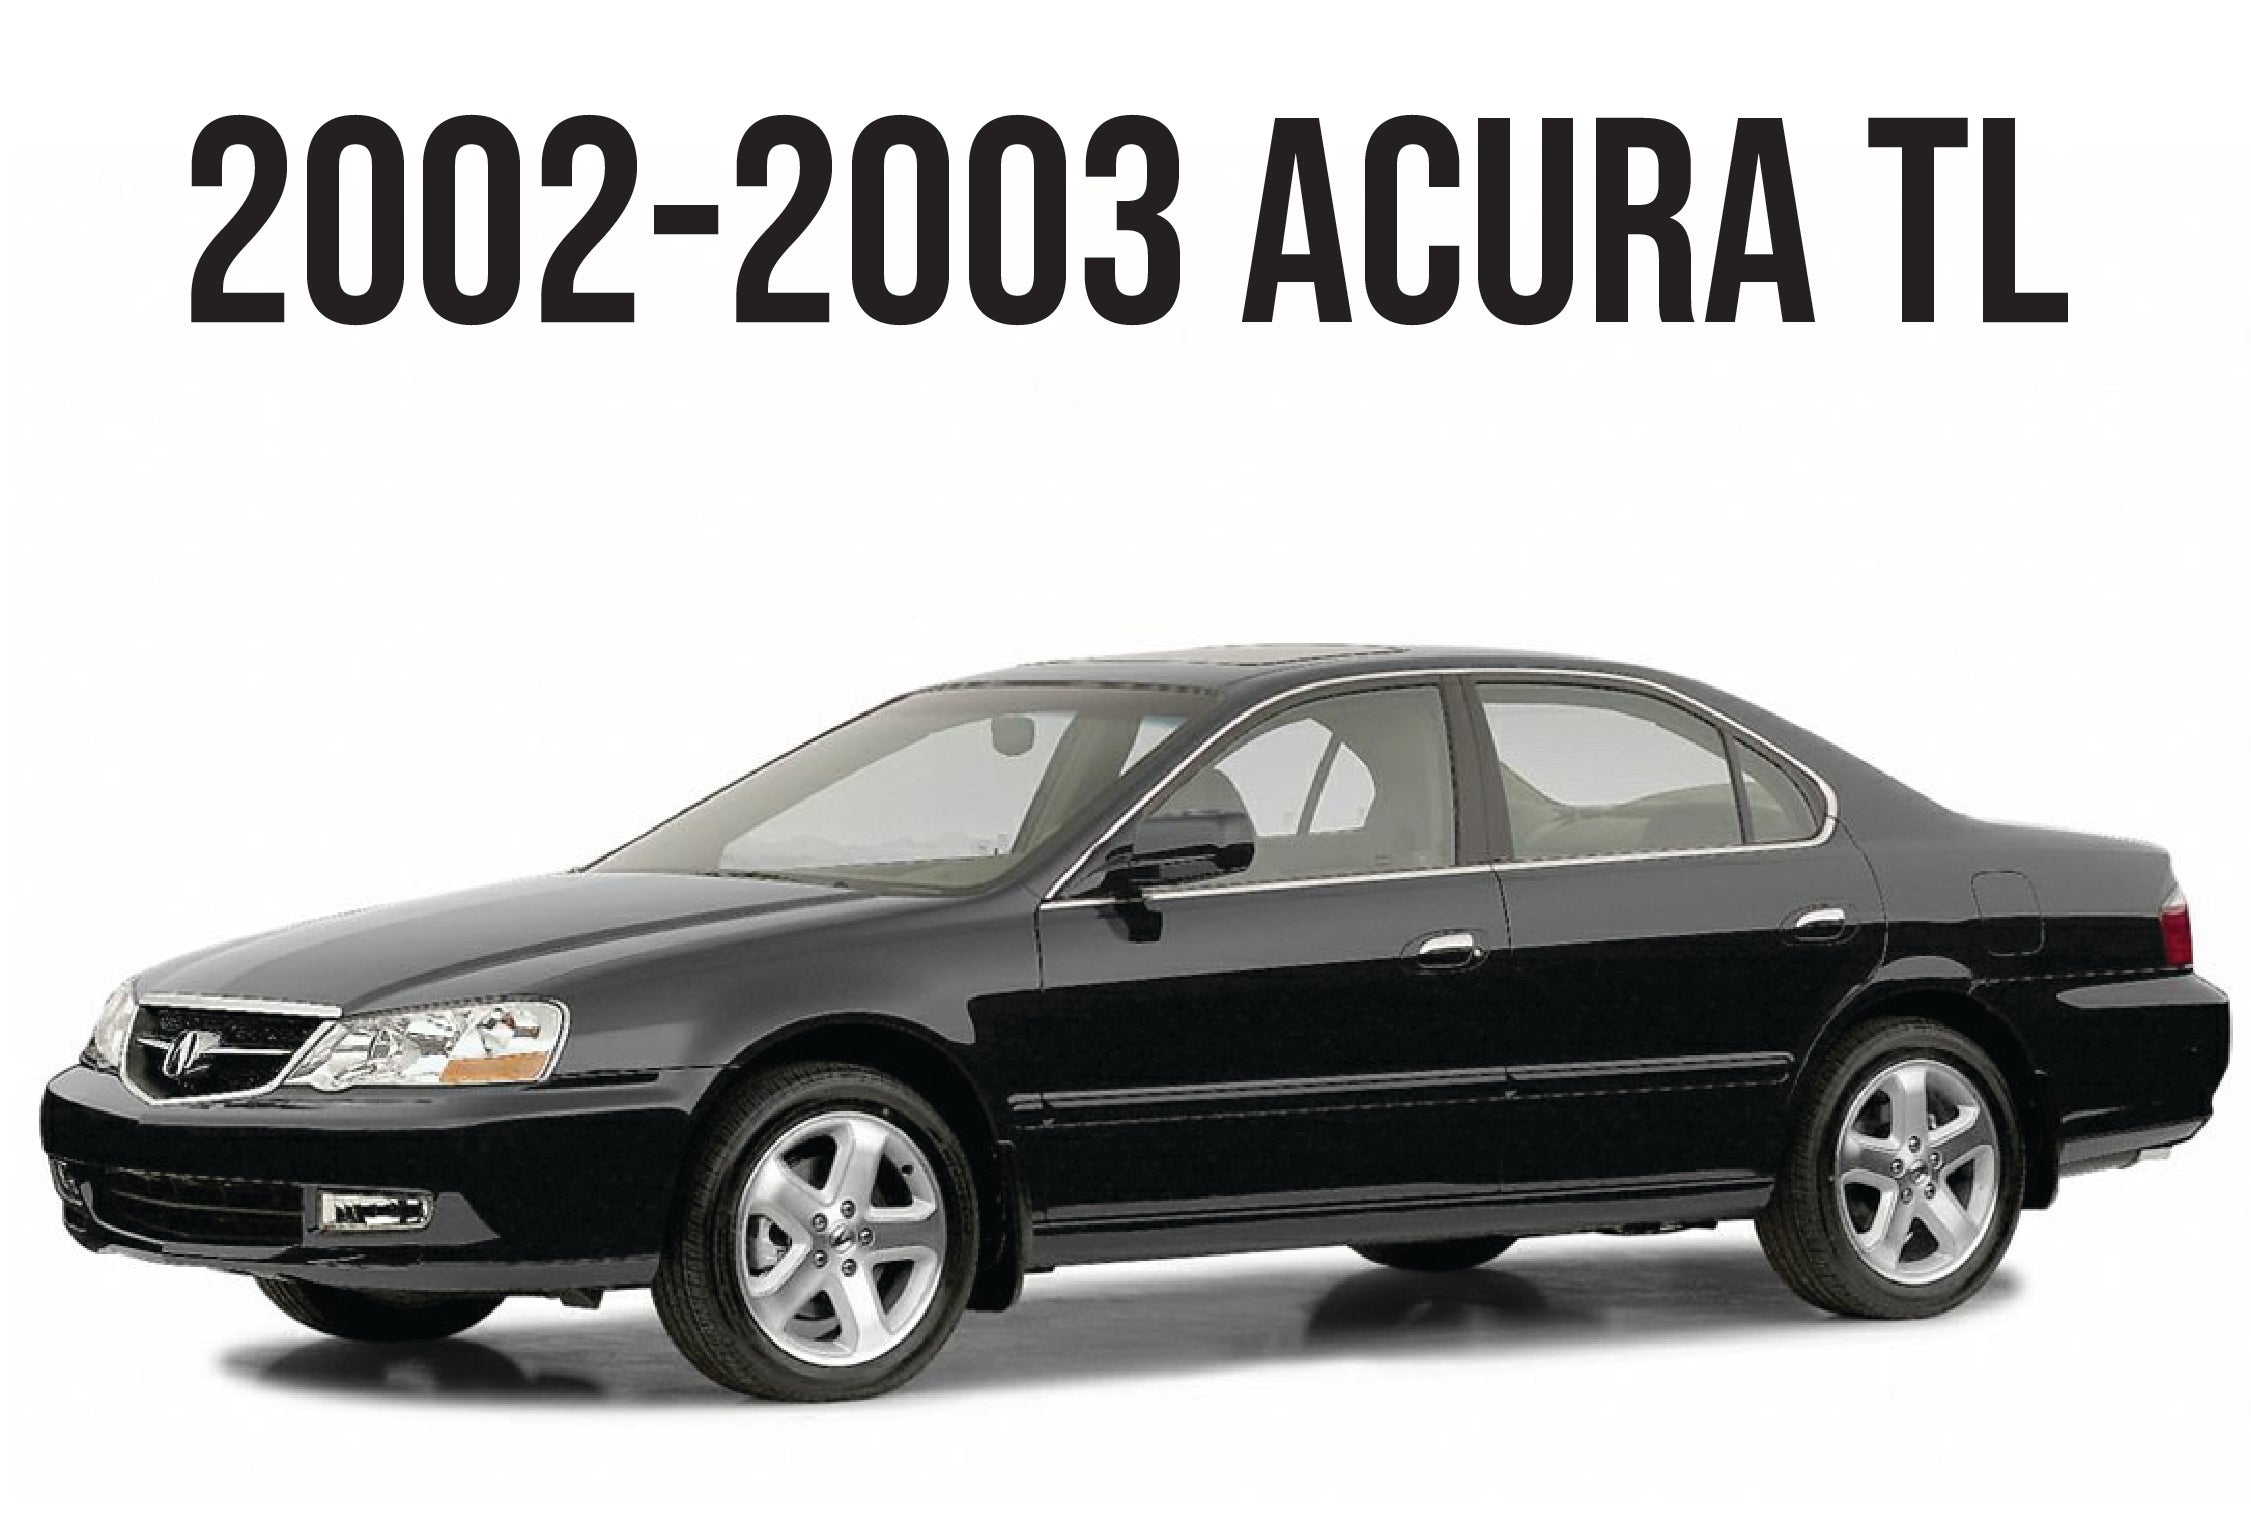 2002-2003 ACURA TL - FACELIFT - Unique Style Racing